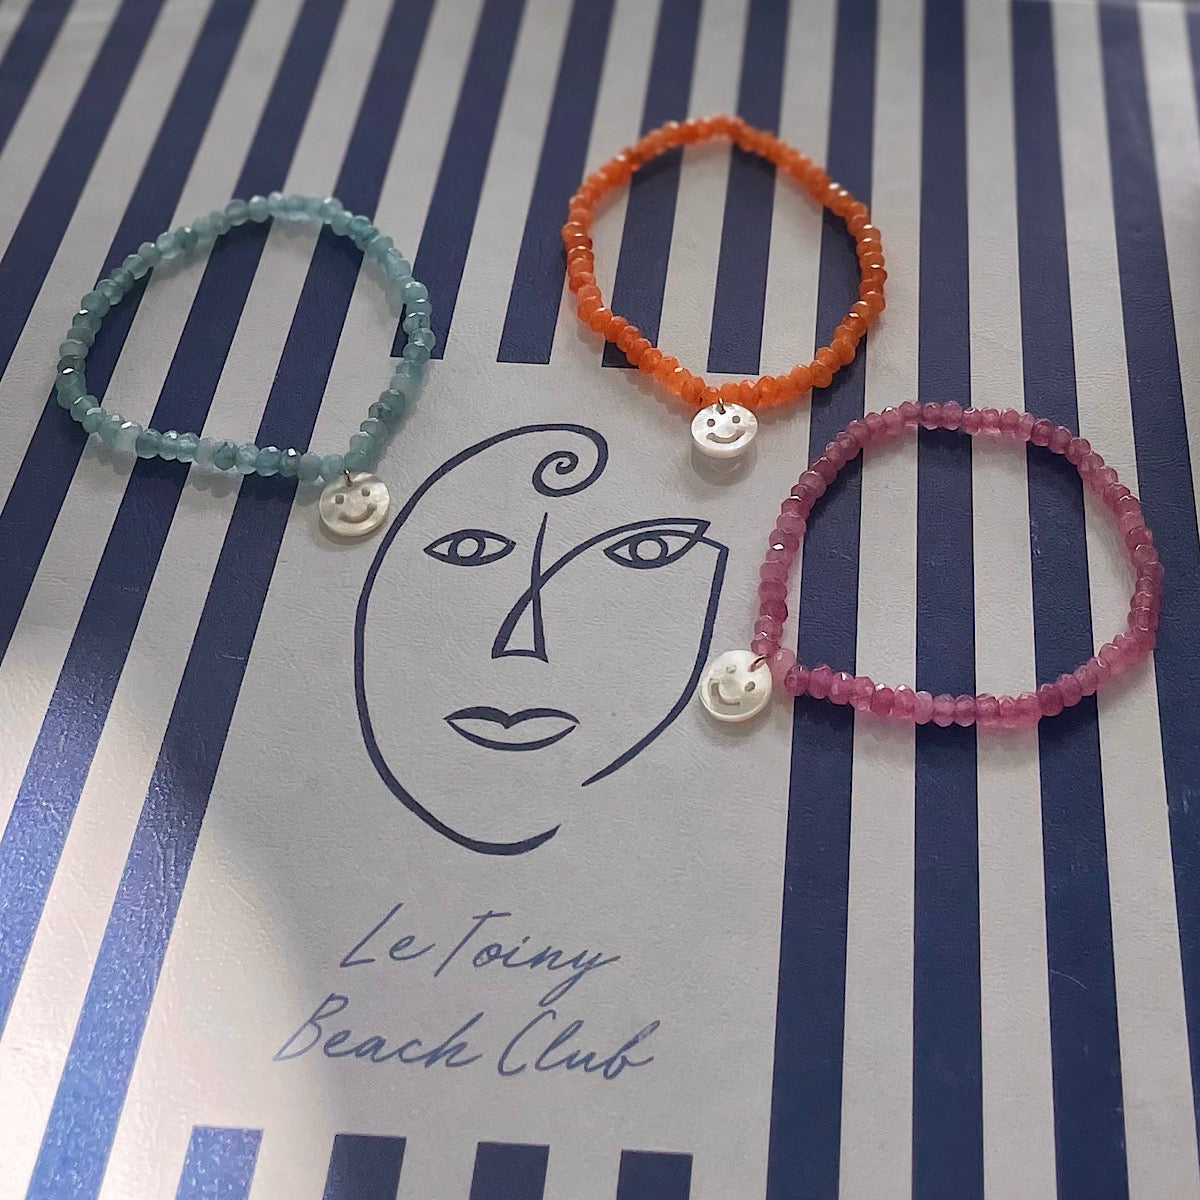 gemstone bracelets in orange, turquoise and purple with shimmering smiley pearl charm